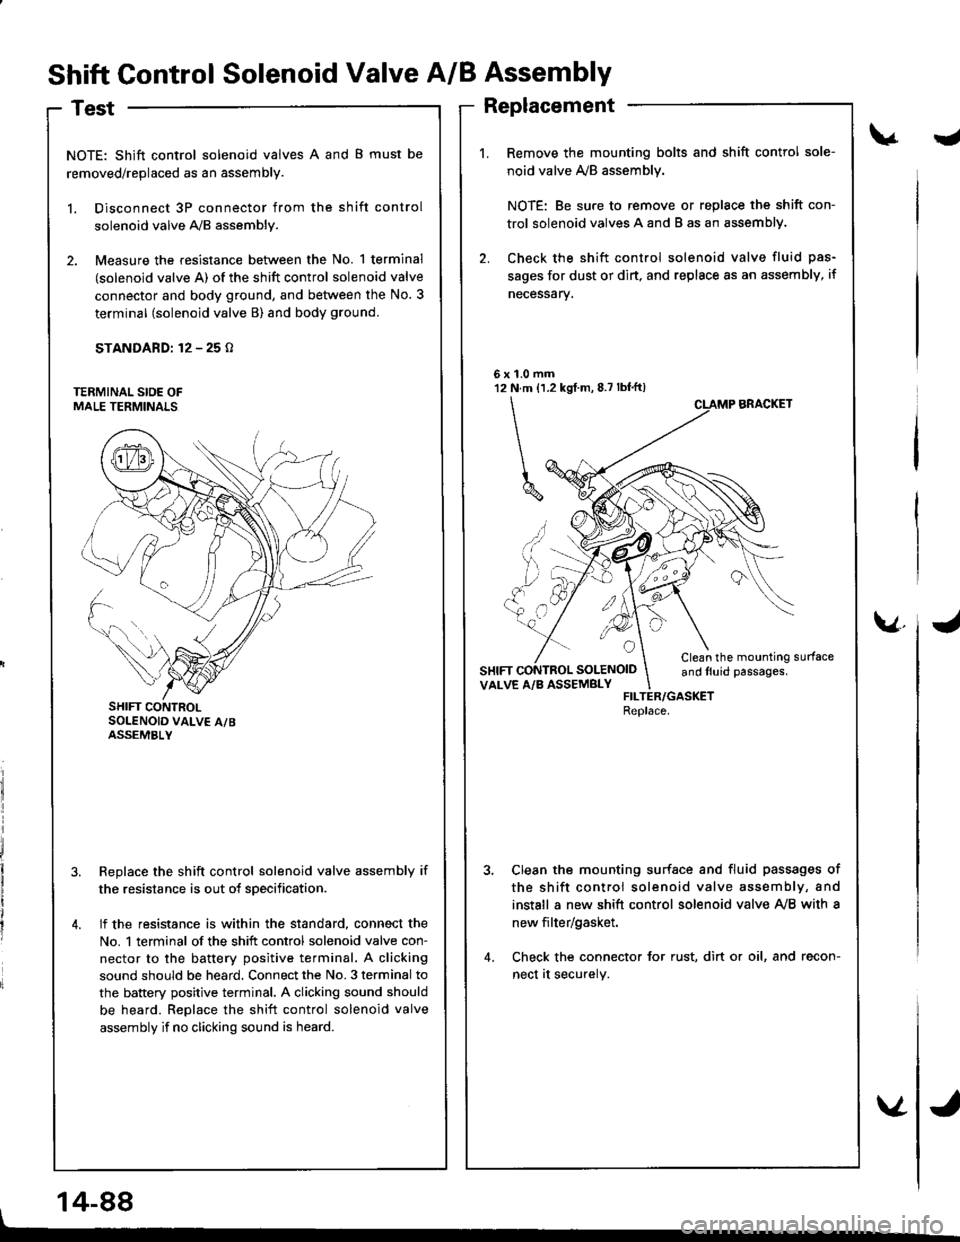 HONDA INTEGRA 1998 4.G Owners Guide Shift Control Solenoid Valve A/B Assembly
Test
NOTE: Shift control solenoid valves A and B must be
removed/replaced as an assembly.
l. Disconnect 3P connector from the shift control
solenoid valve A,/